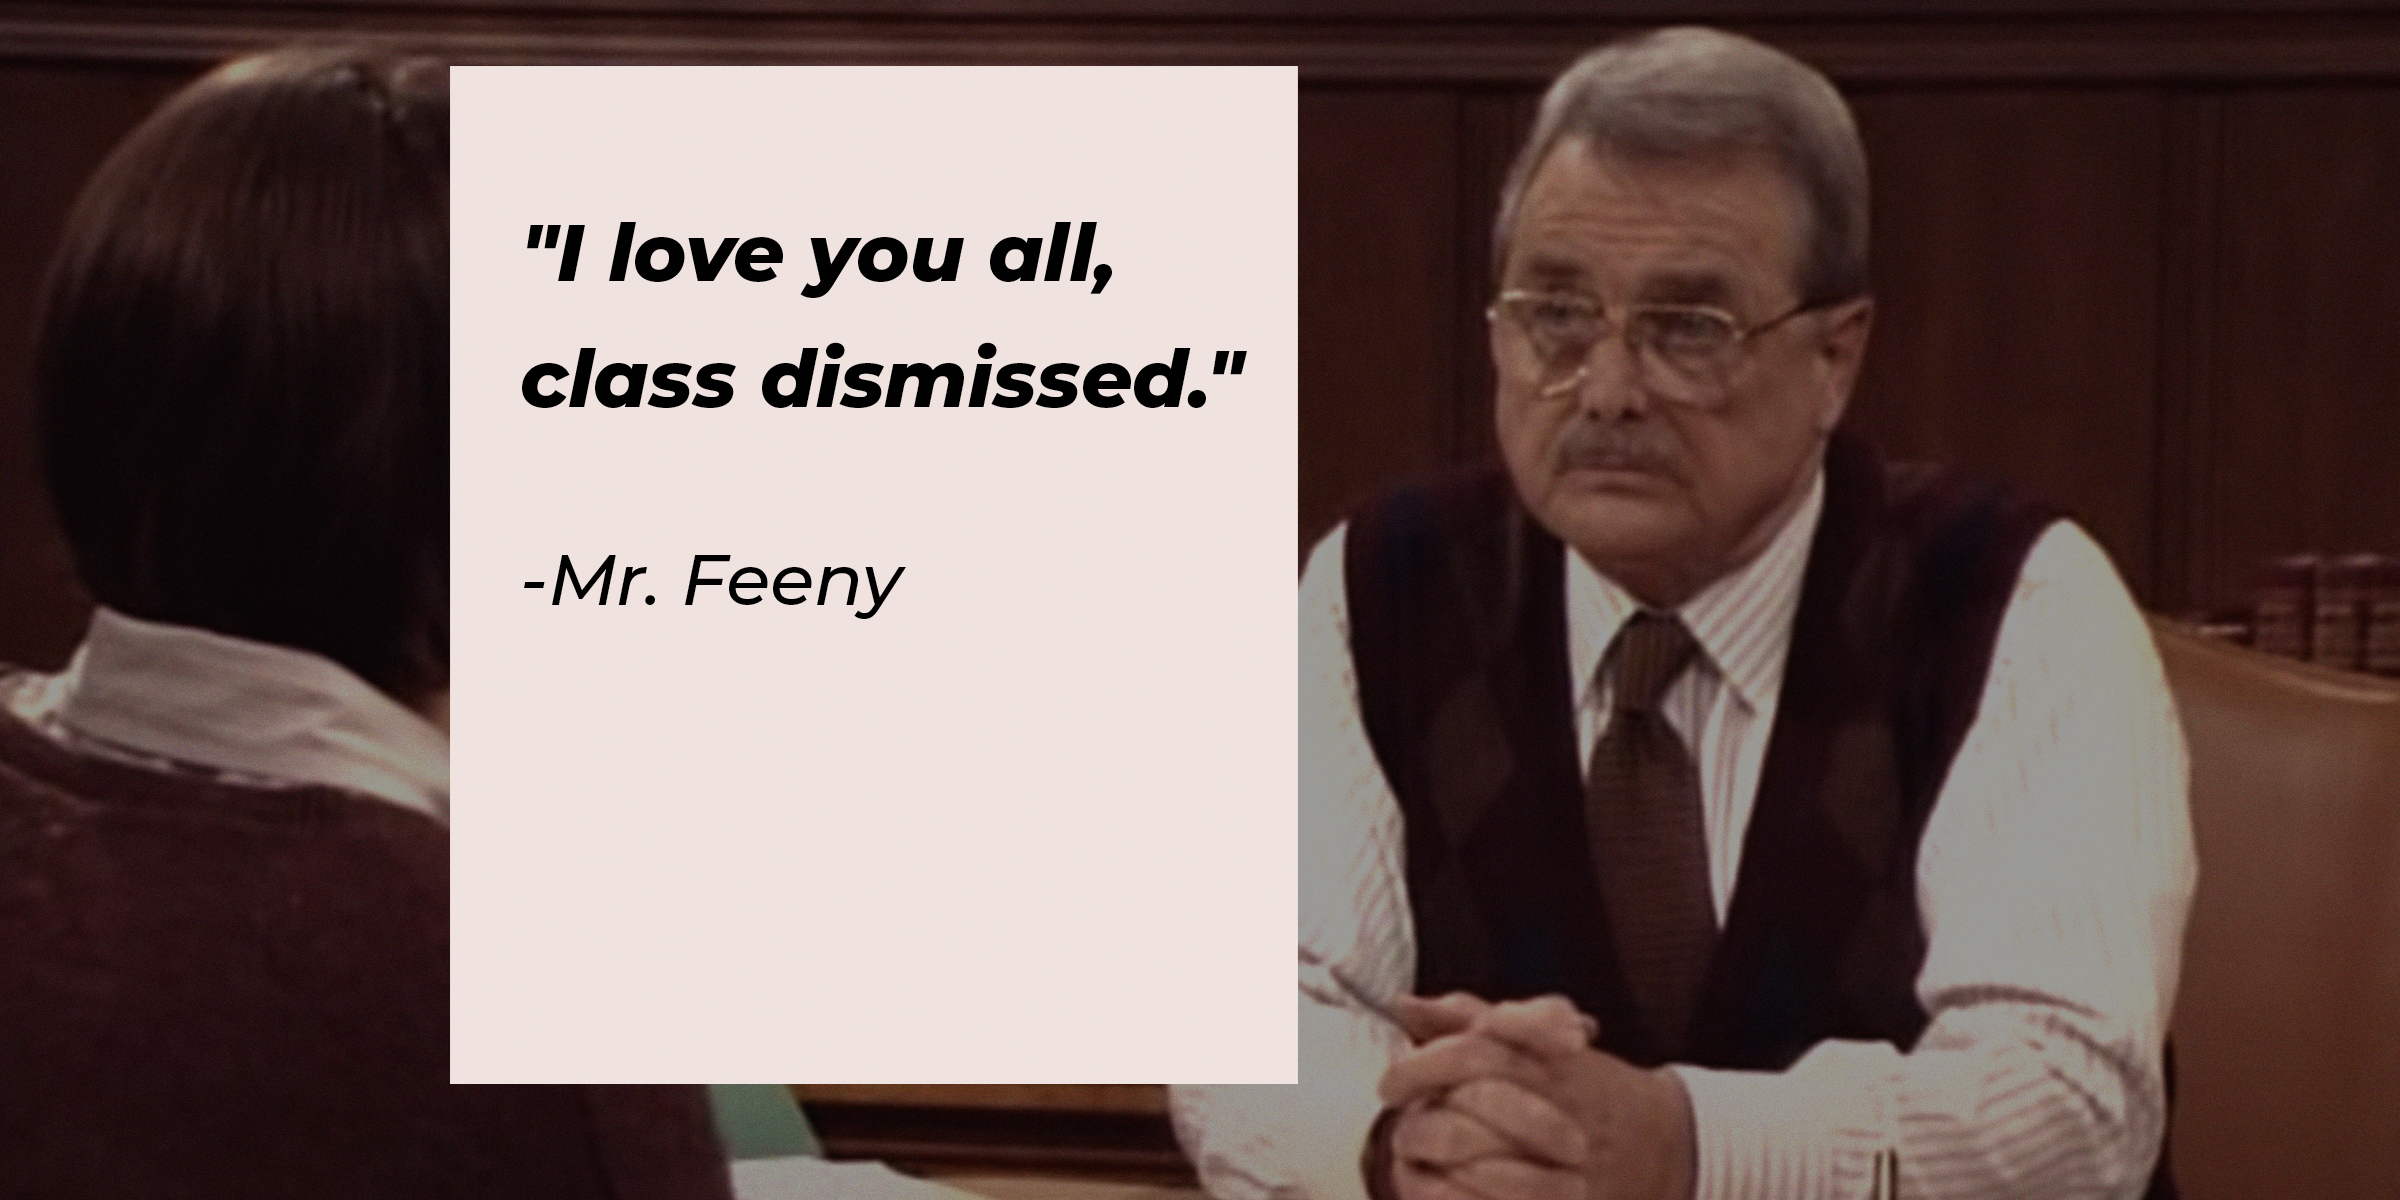 An image of Mr. Feeny with his quote: "I love you all, class dismissed." | Source: facebook.com/BoyMeetsWorldSeries